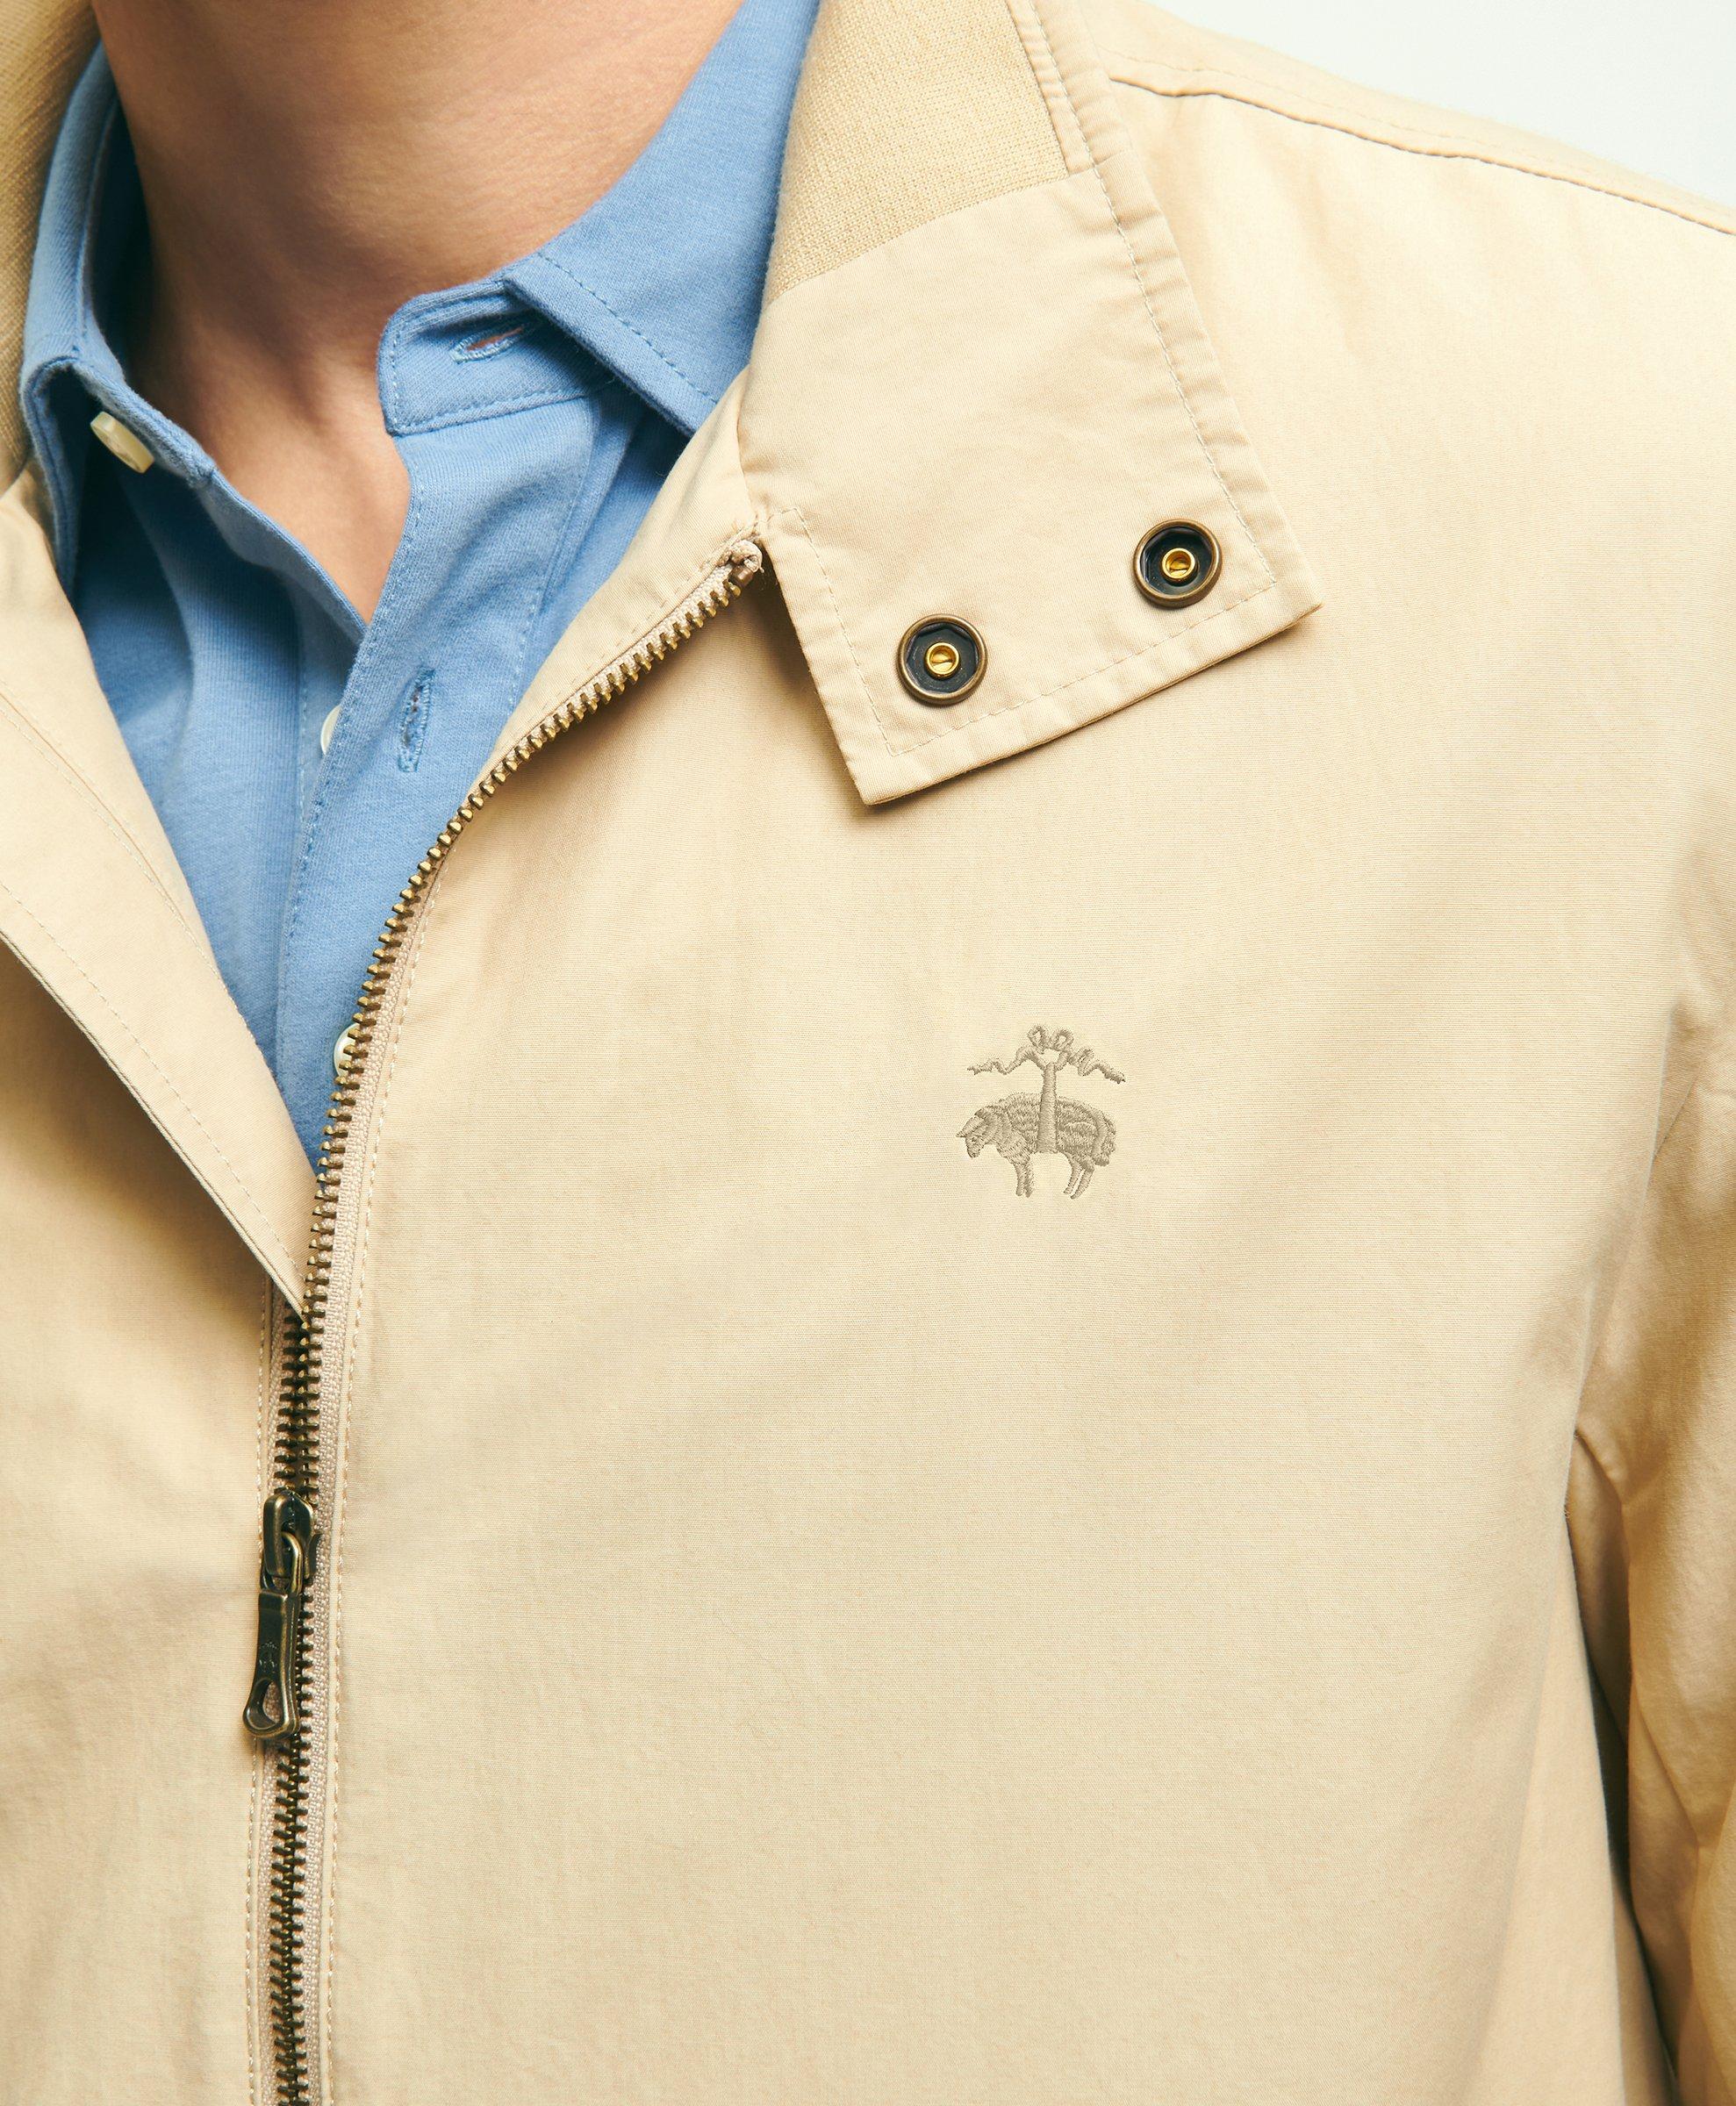 What Is a Harrington Jacket and Why It's a Wardrobe Staple